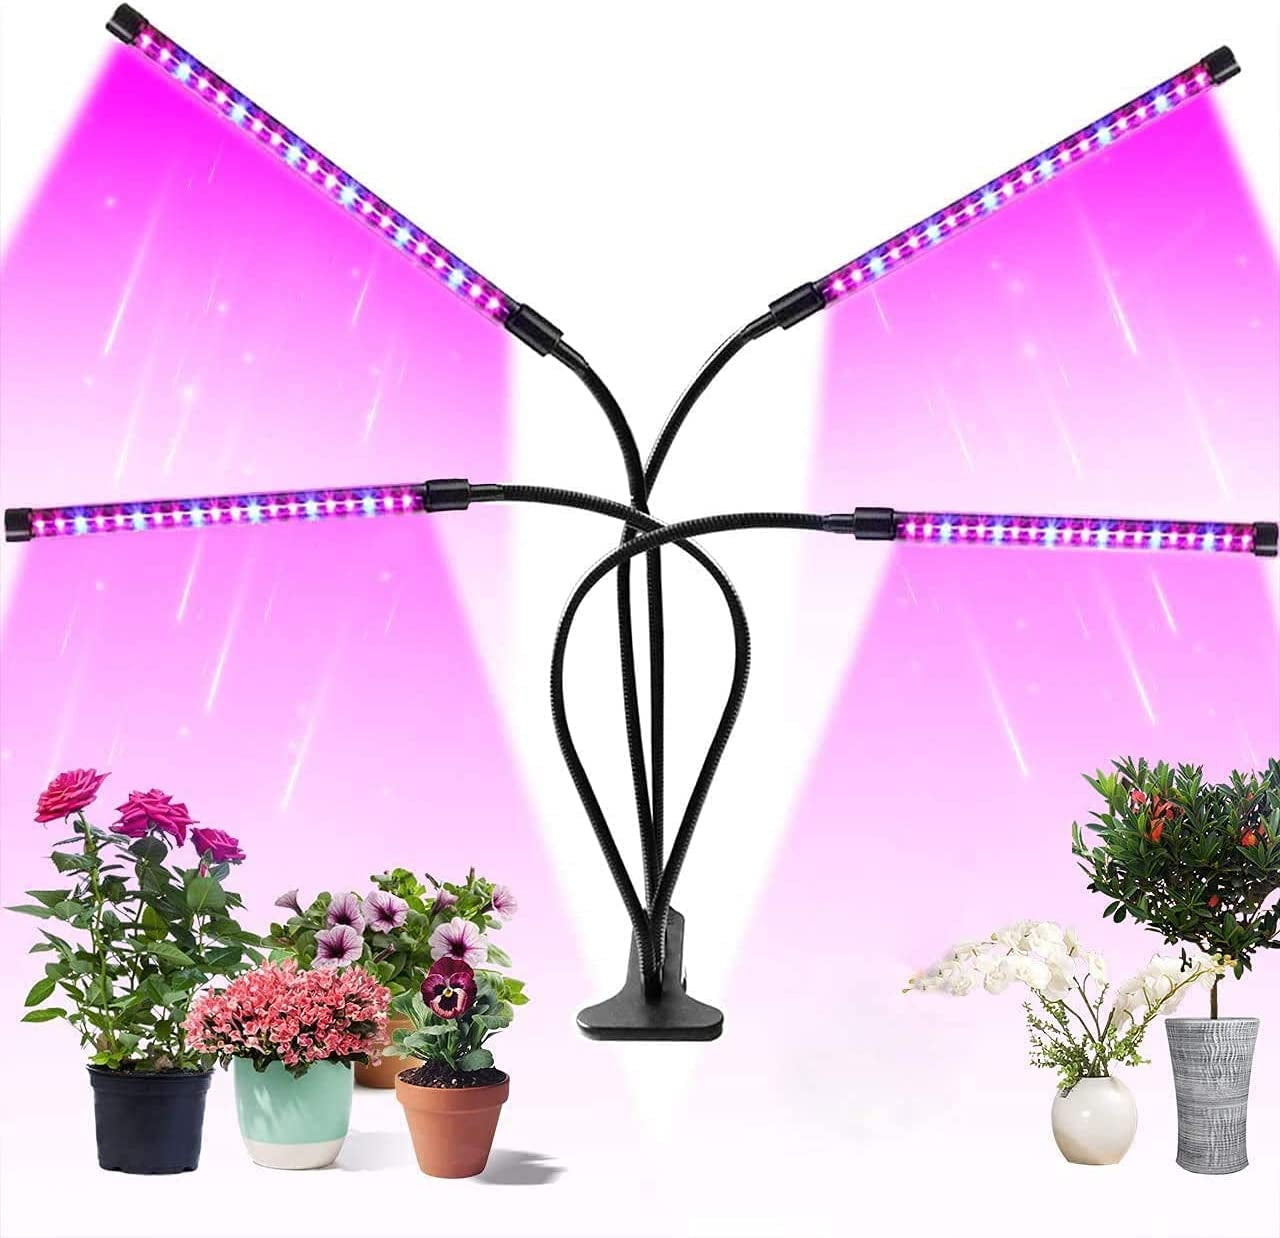 Jijitayo, Grow Lamp for Indoor Plants with 3 Spectrum Models 4 Heads LED Grow Light with Timing Setting